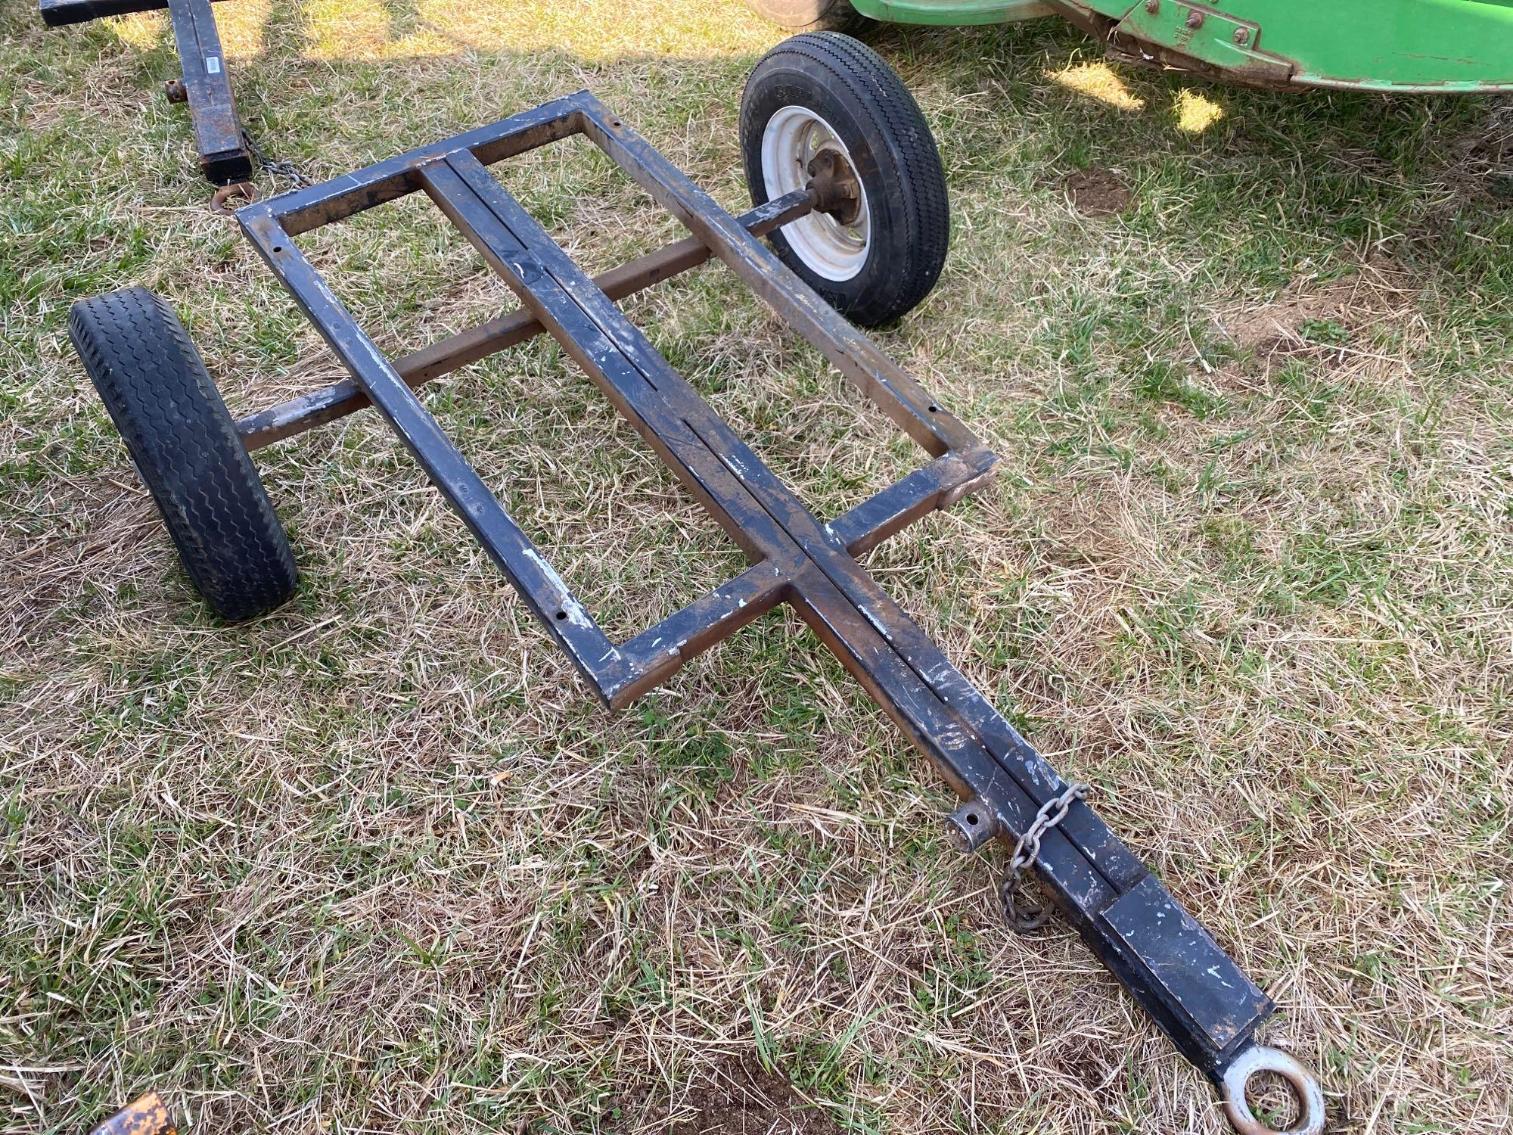 Image for  Small Trailer Frame with Tires 4 x 2.5 Ft